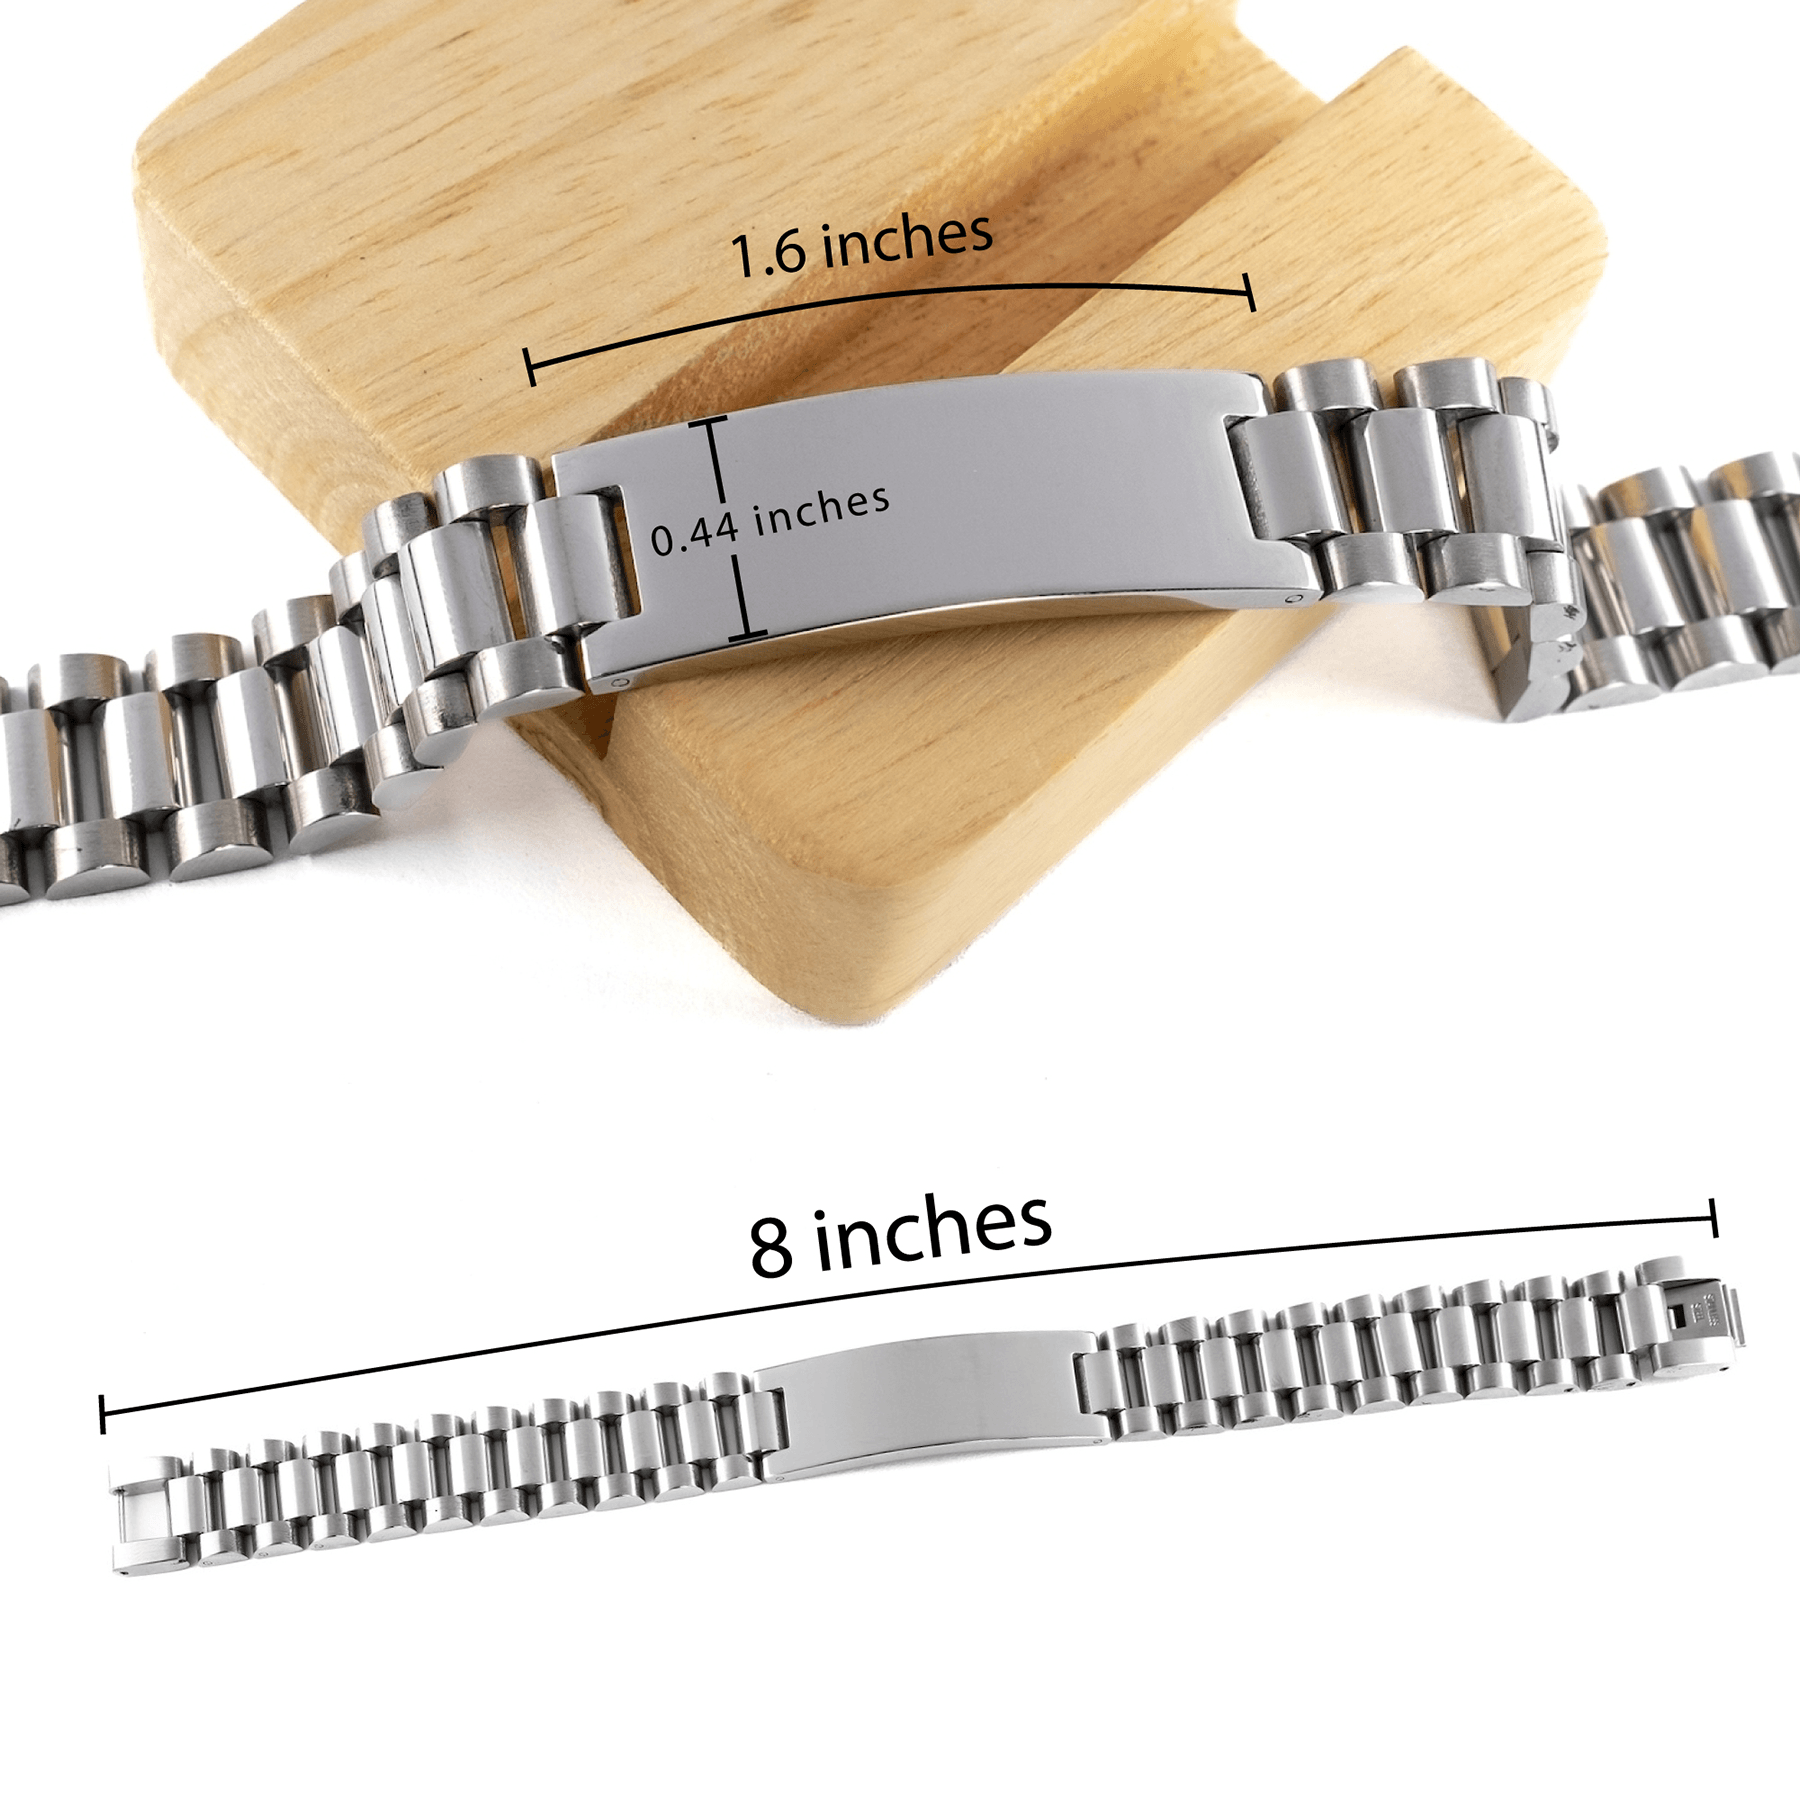 Sarcastic Electrician Ladder Stainless Steel Bracelet Gifts, Christmas Holiday Gifts for Electrician Birthday, Electrician: Because greatness is woven into the fabric of every day, Coworkers, Friends - Mallard Moon Gift Shop